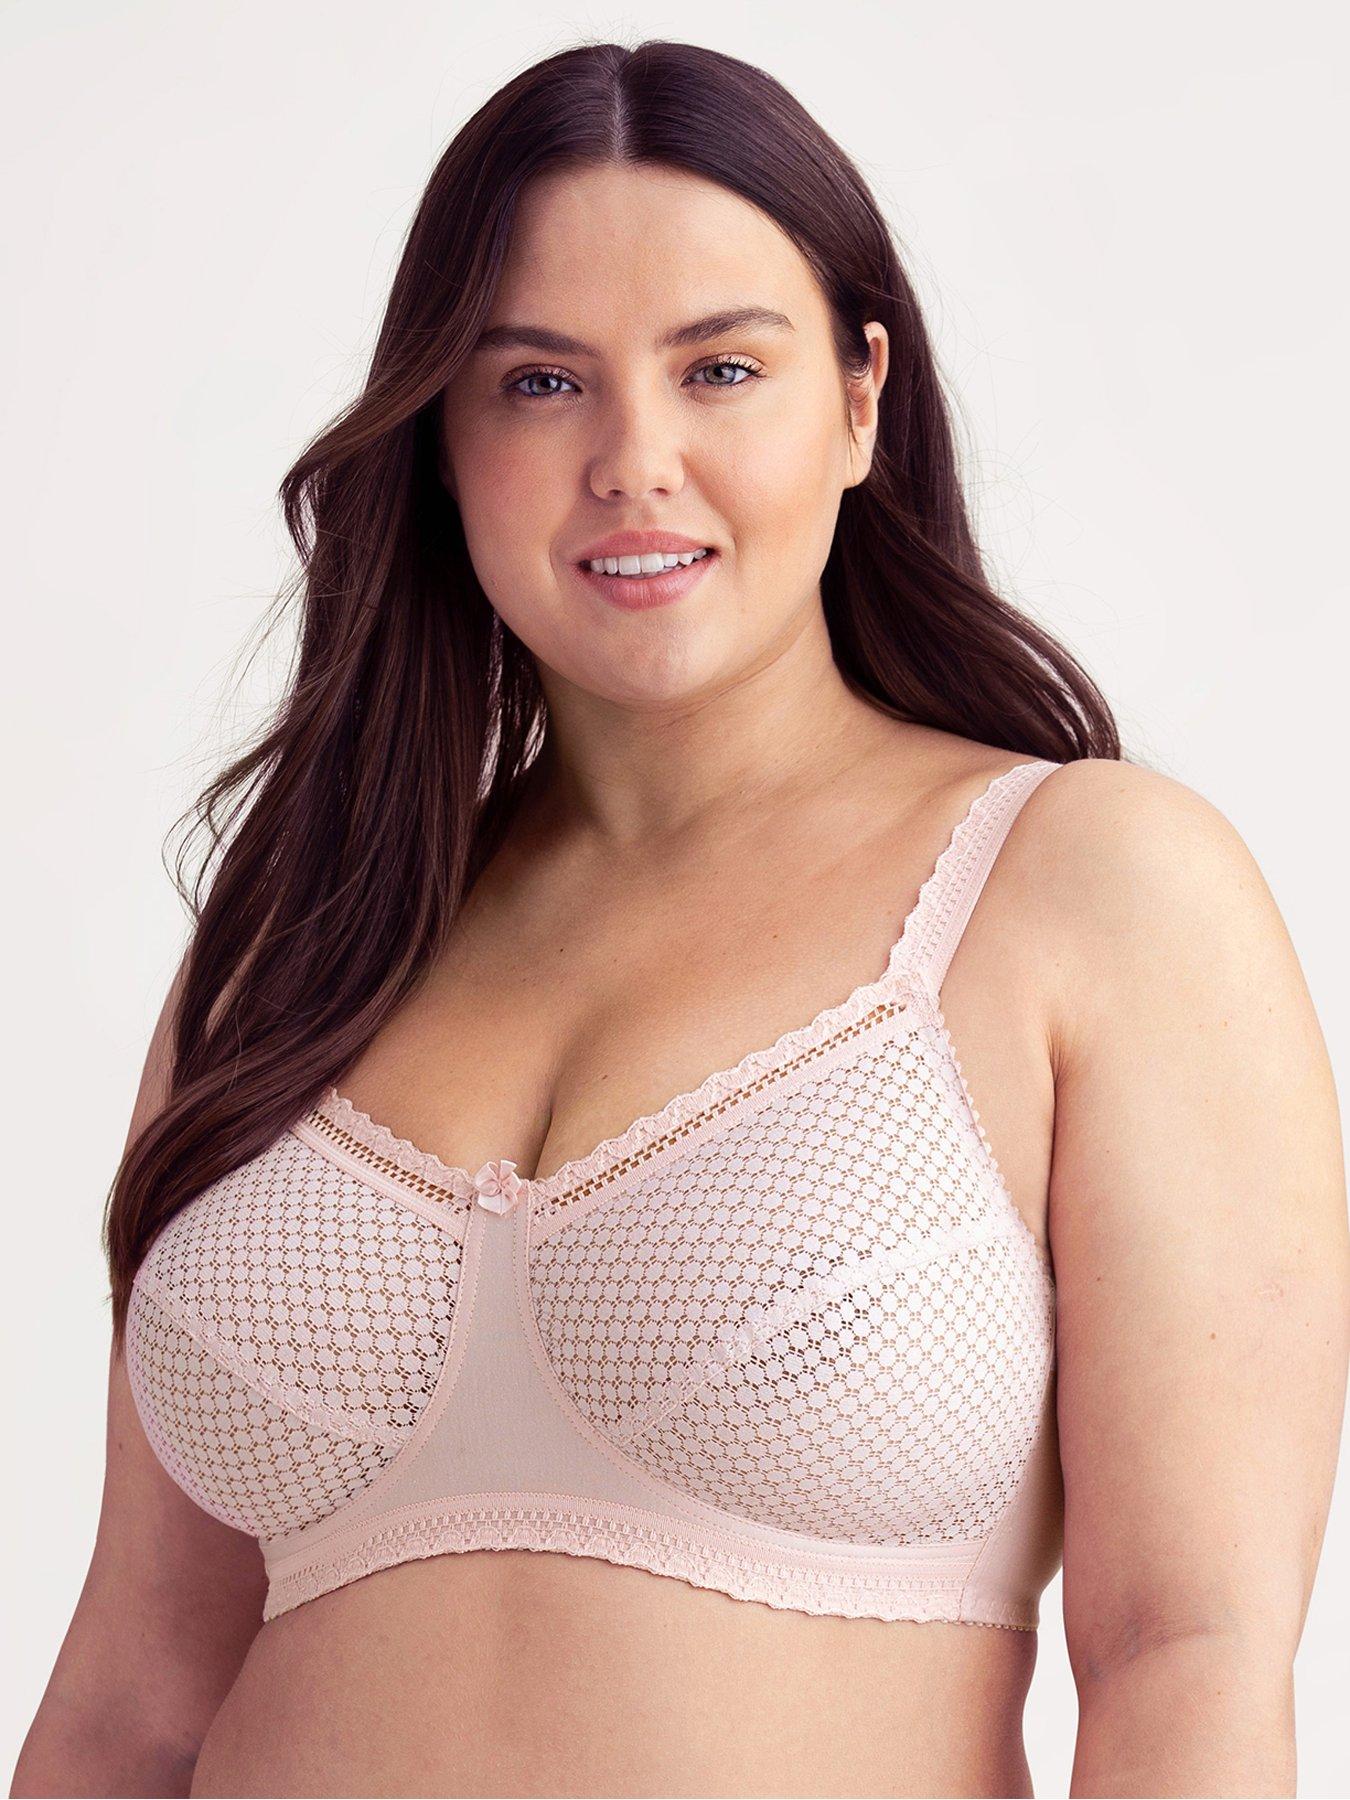 https://media.very.co.uk/i/very/VC0EM_SQ1_0000000063_PINK_MDf/miss-mary-of-sweden-miss-mary-non-wired-cotton-dot-lace-bra.jpg?$180x240_retinamobilex2$